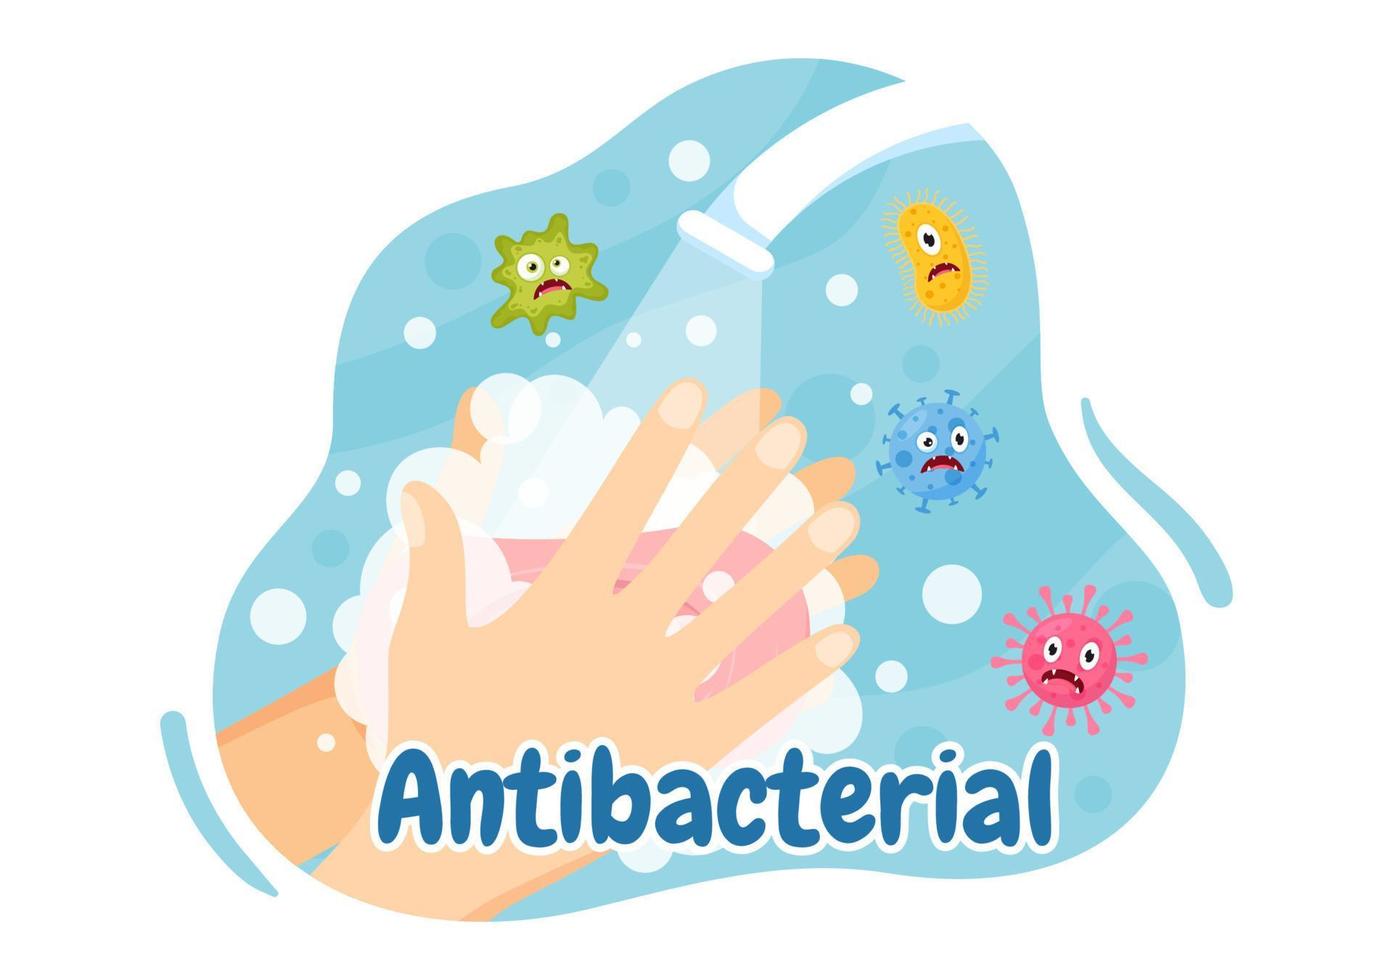 Antibacterial Illustration with Washing Hands, Virus Infection and Microbes Bacterias Control in Hygiene Healthcare Flat Cartoon Hand Drawn Templates vector